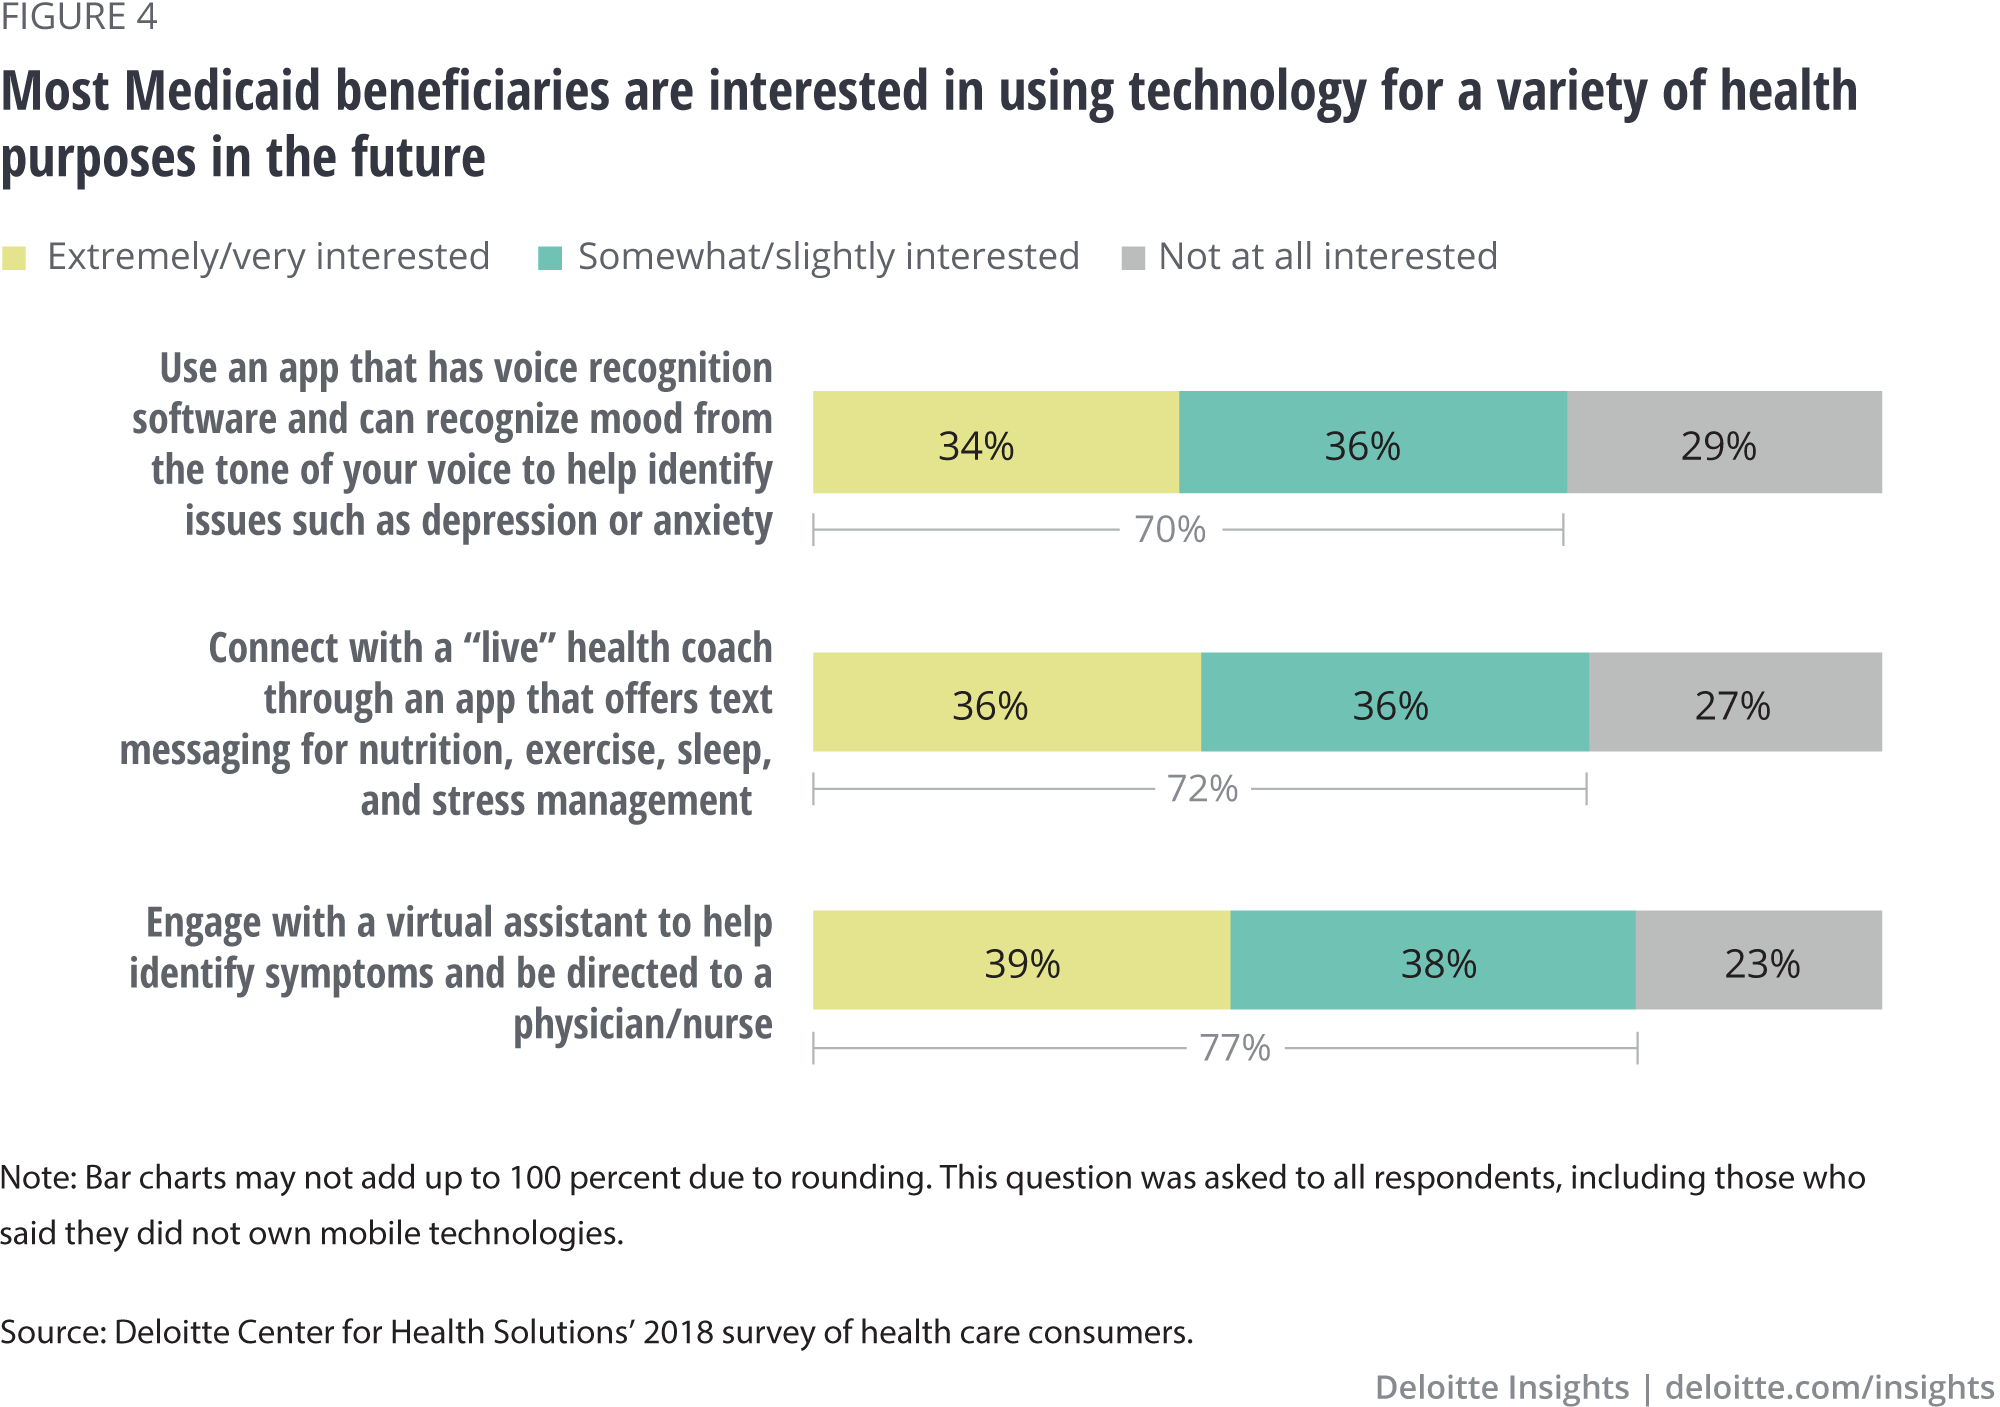 Most Medicaid beneficiaries are interested in using technology for a variety of health purposes in the future